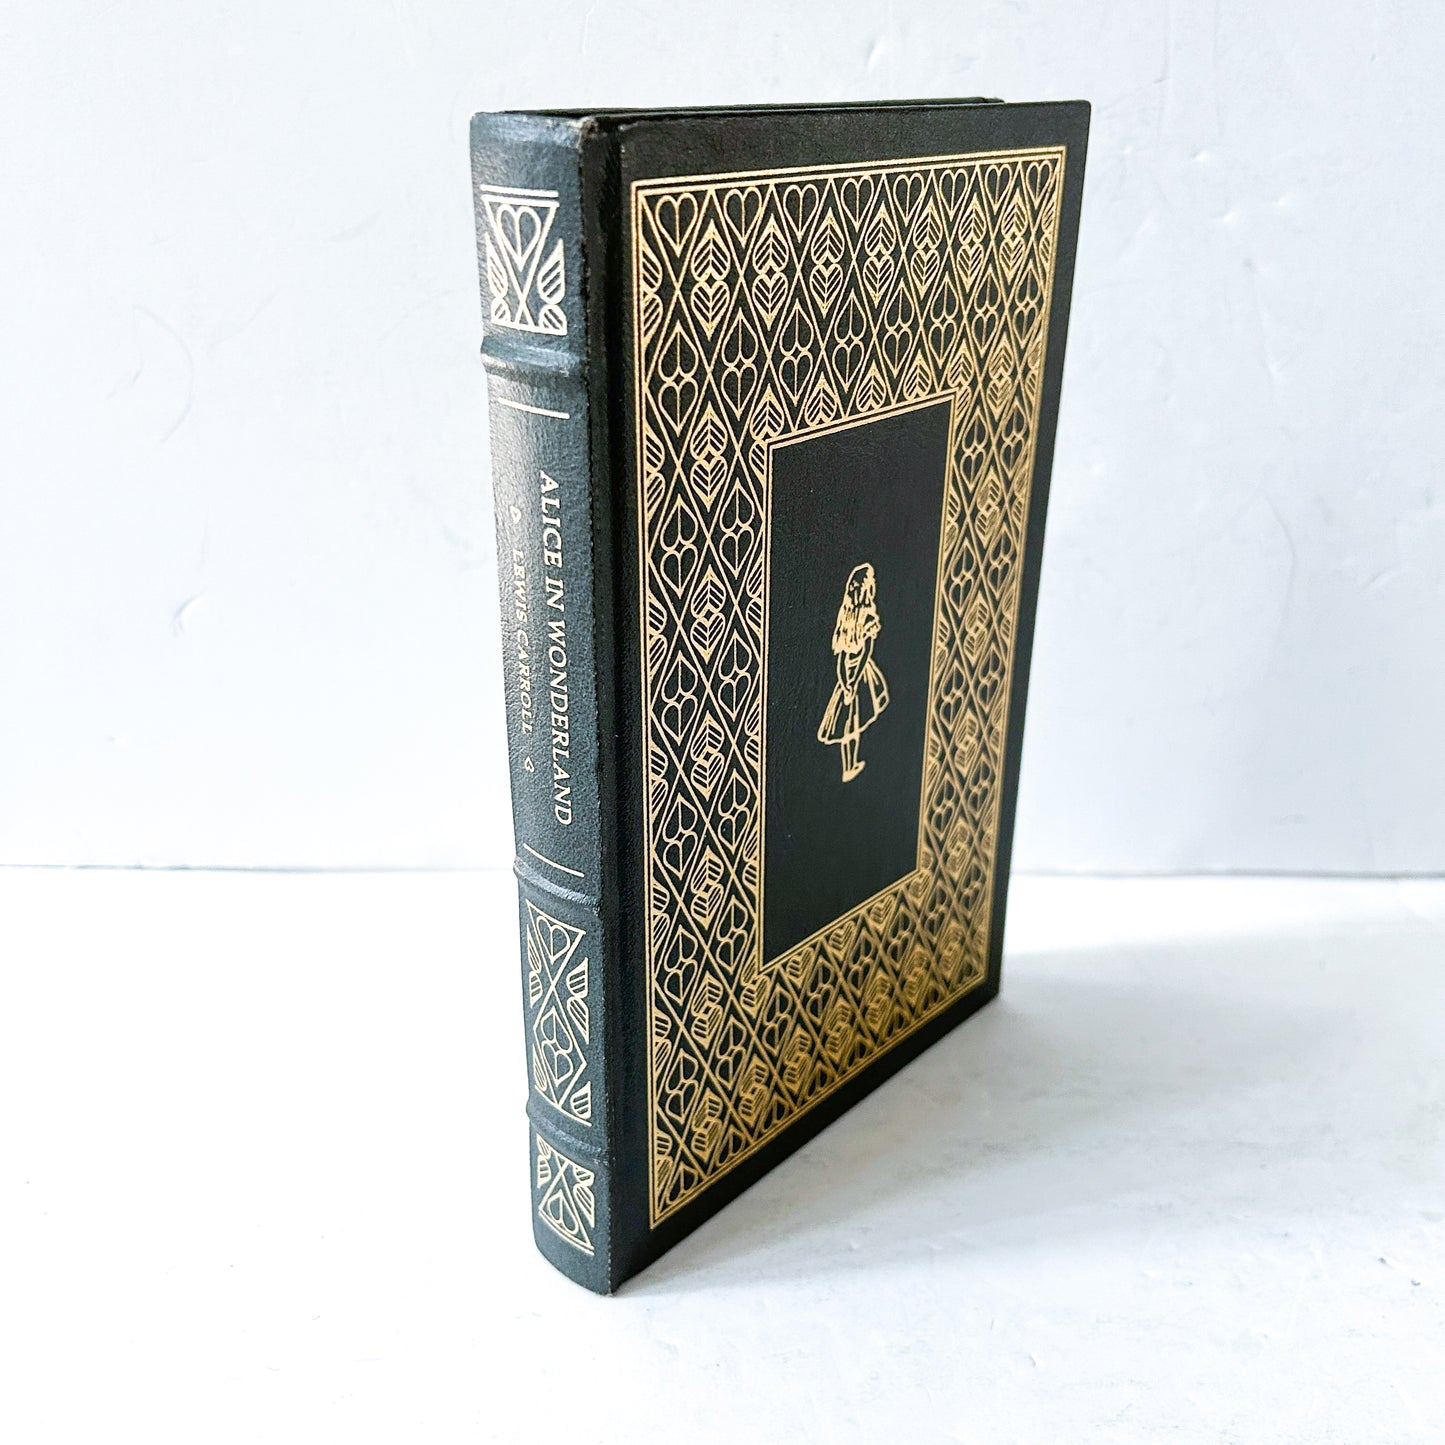 Alice's Adventures in Wonderland, Vintage Edition from The Franklin Library